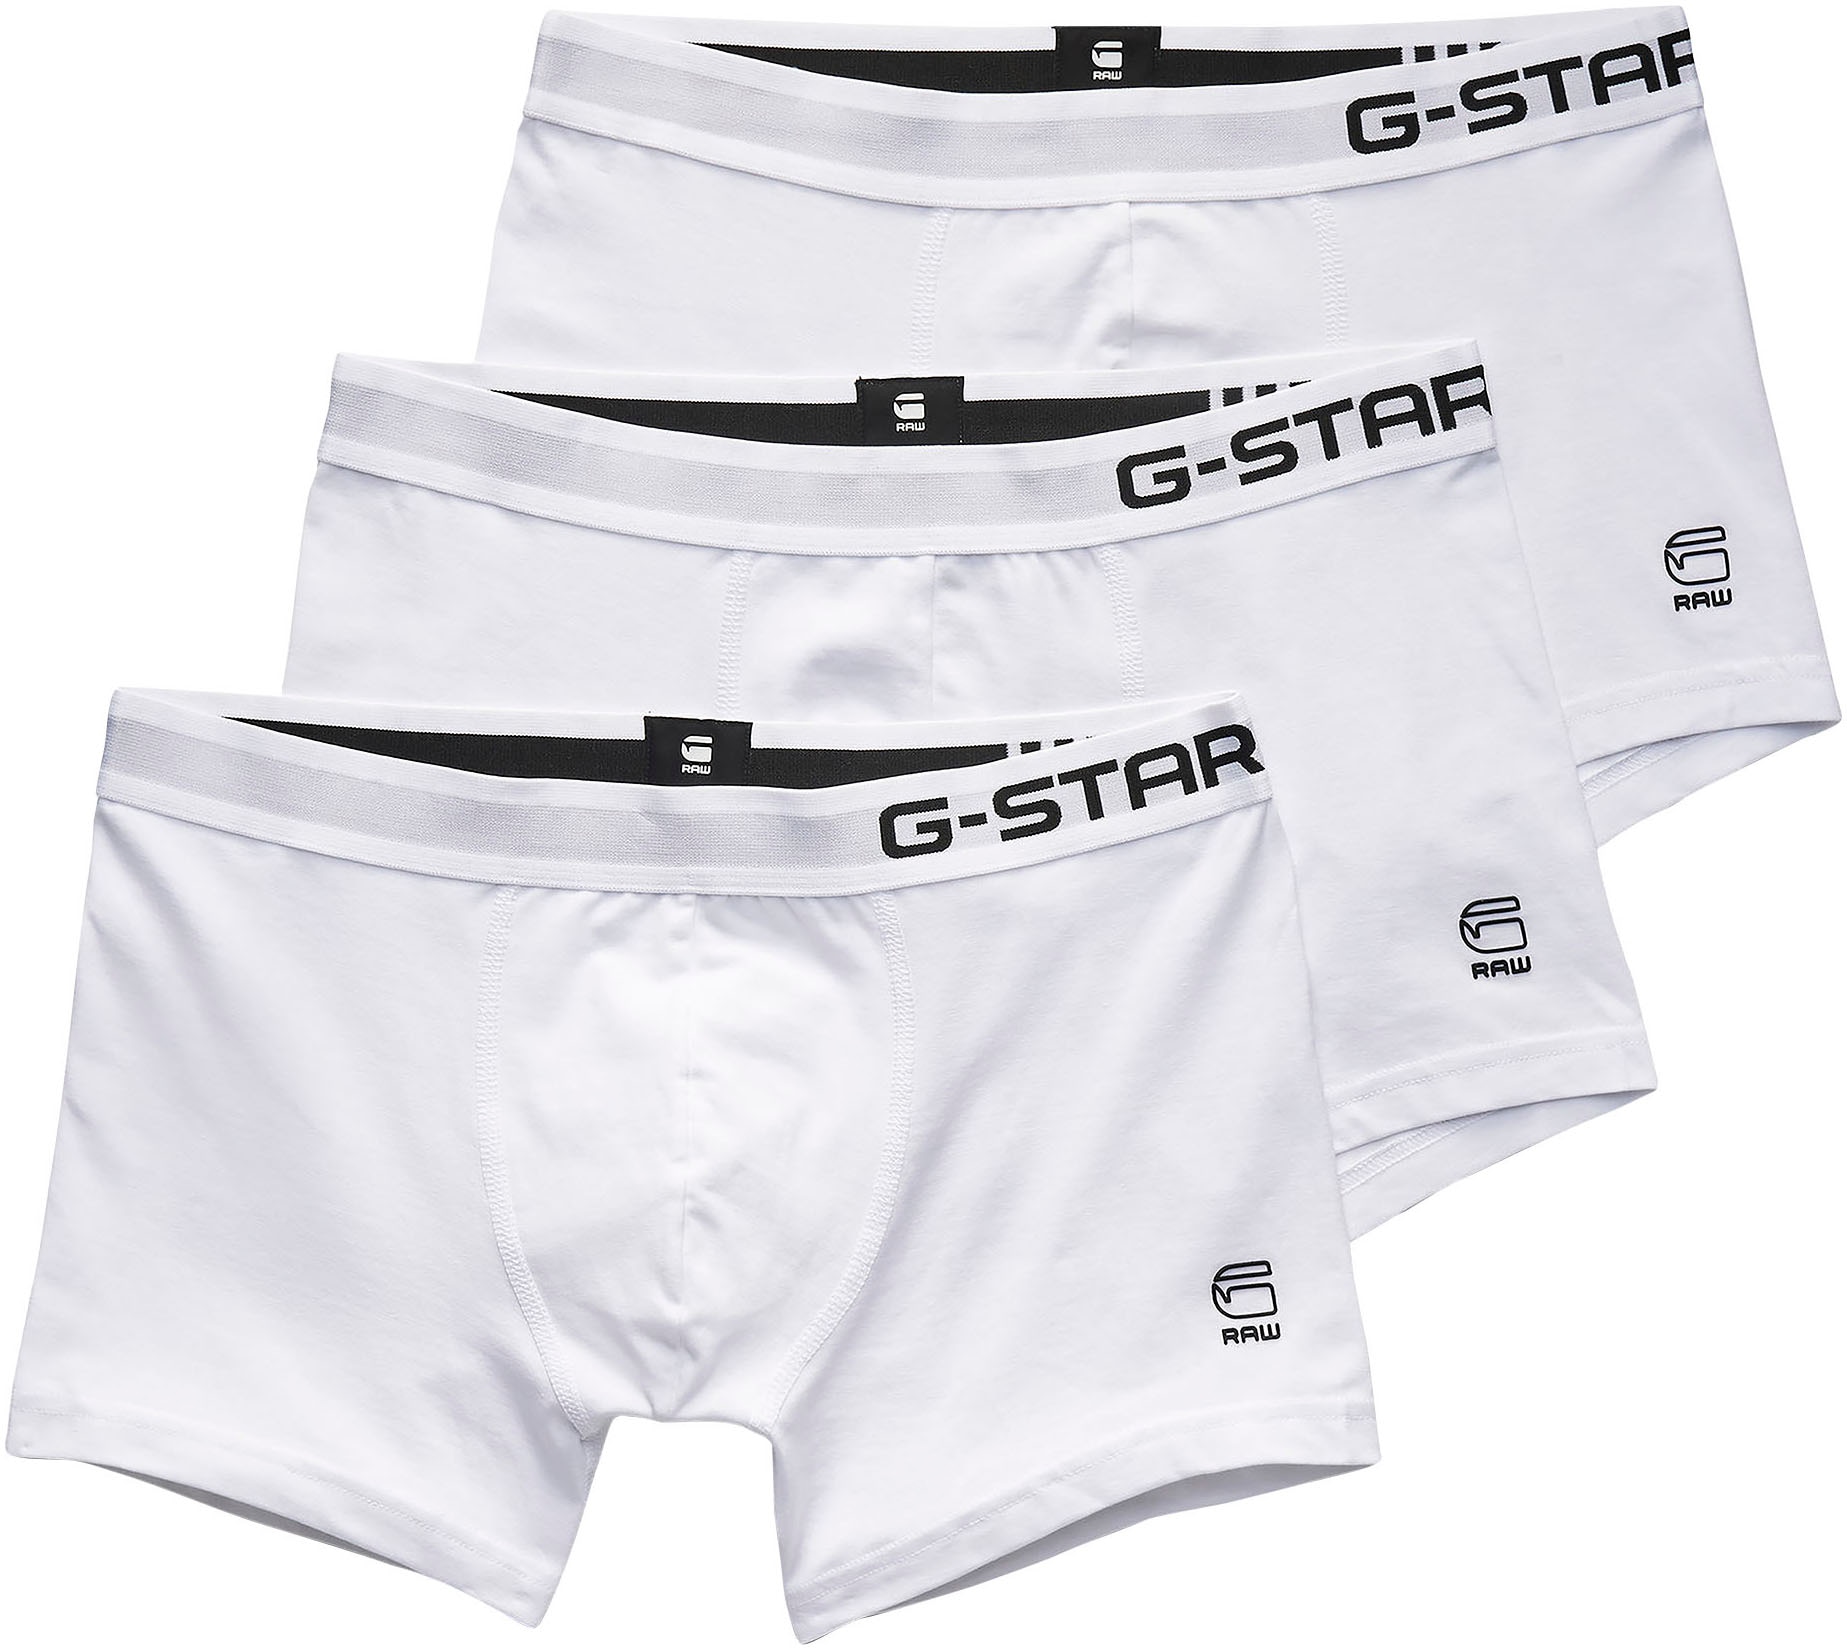 Boxer »Classic trunk 3 pack«, (Packung, 3 St., 3er-Pack)